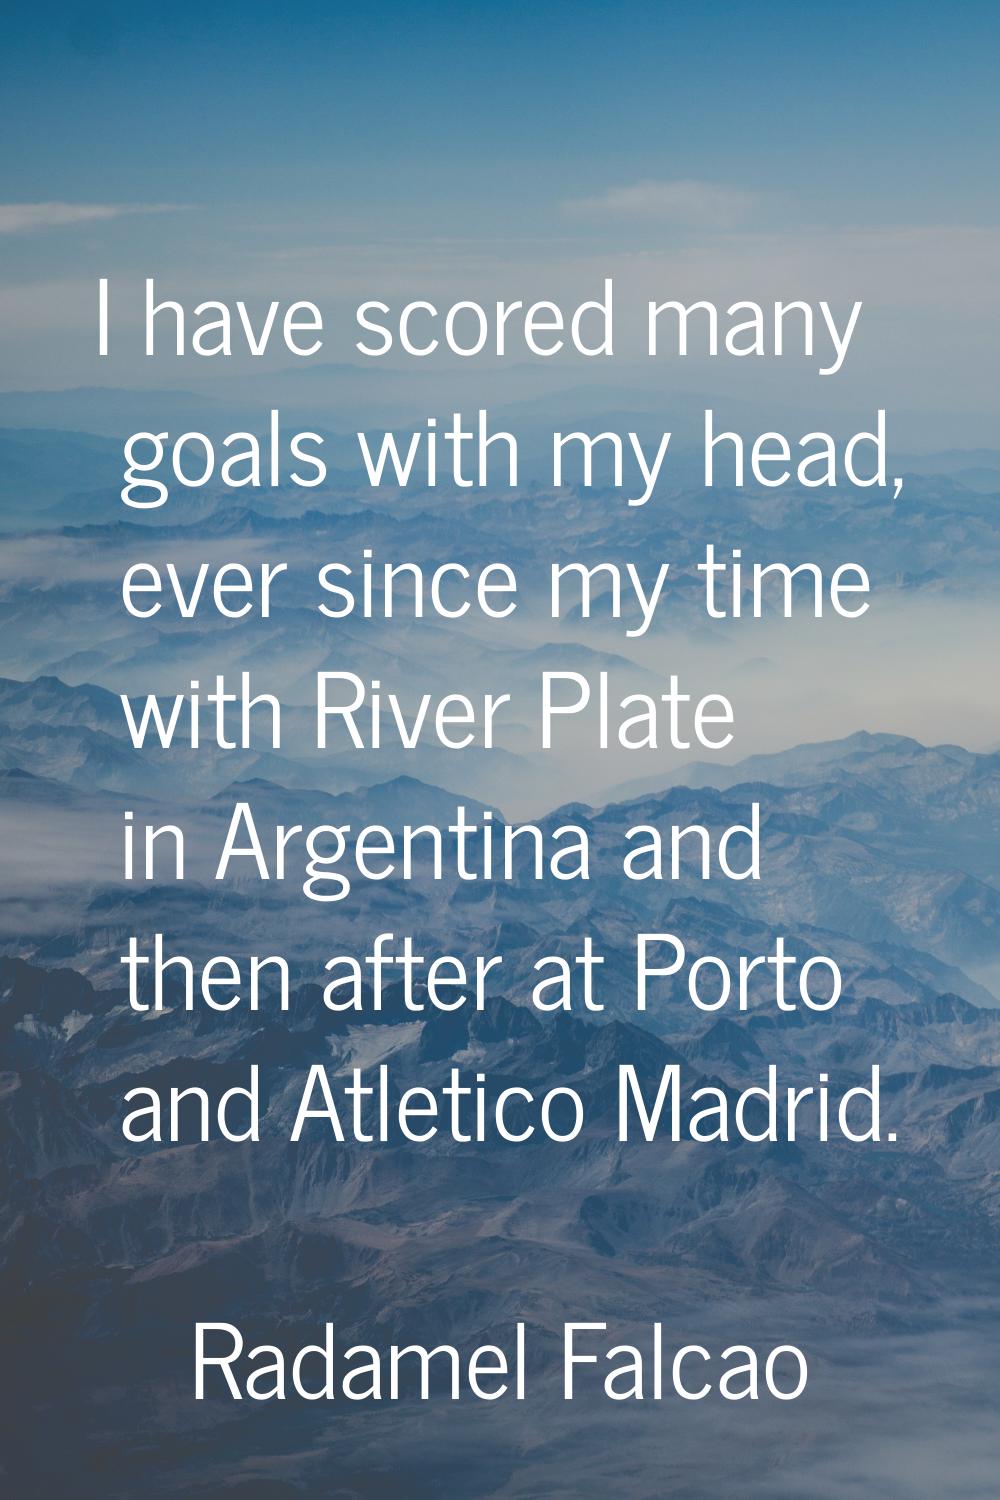 I have scored many goals with my head, ever since my time with River Plate in Argentina and then af